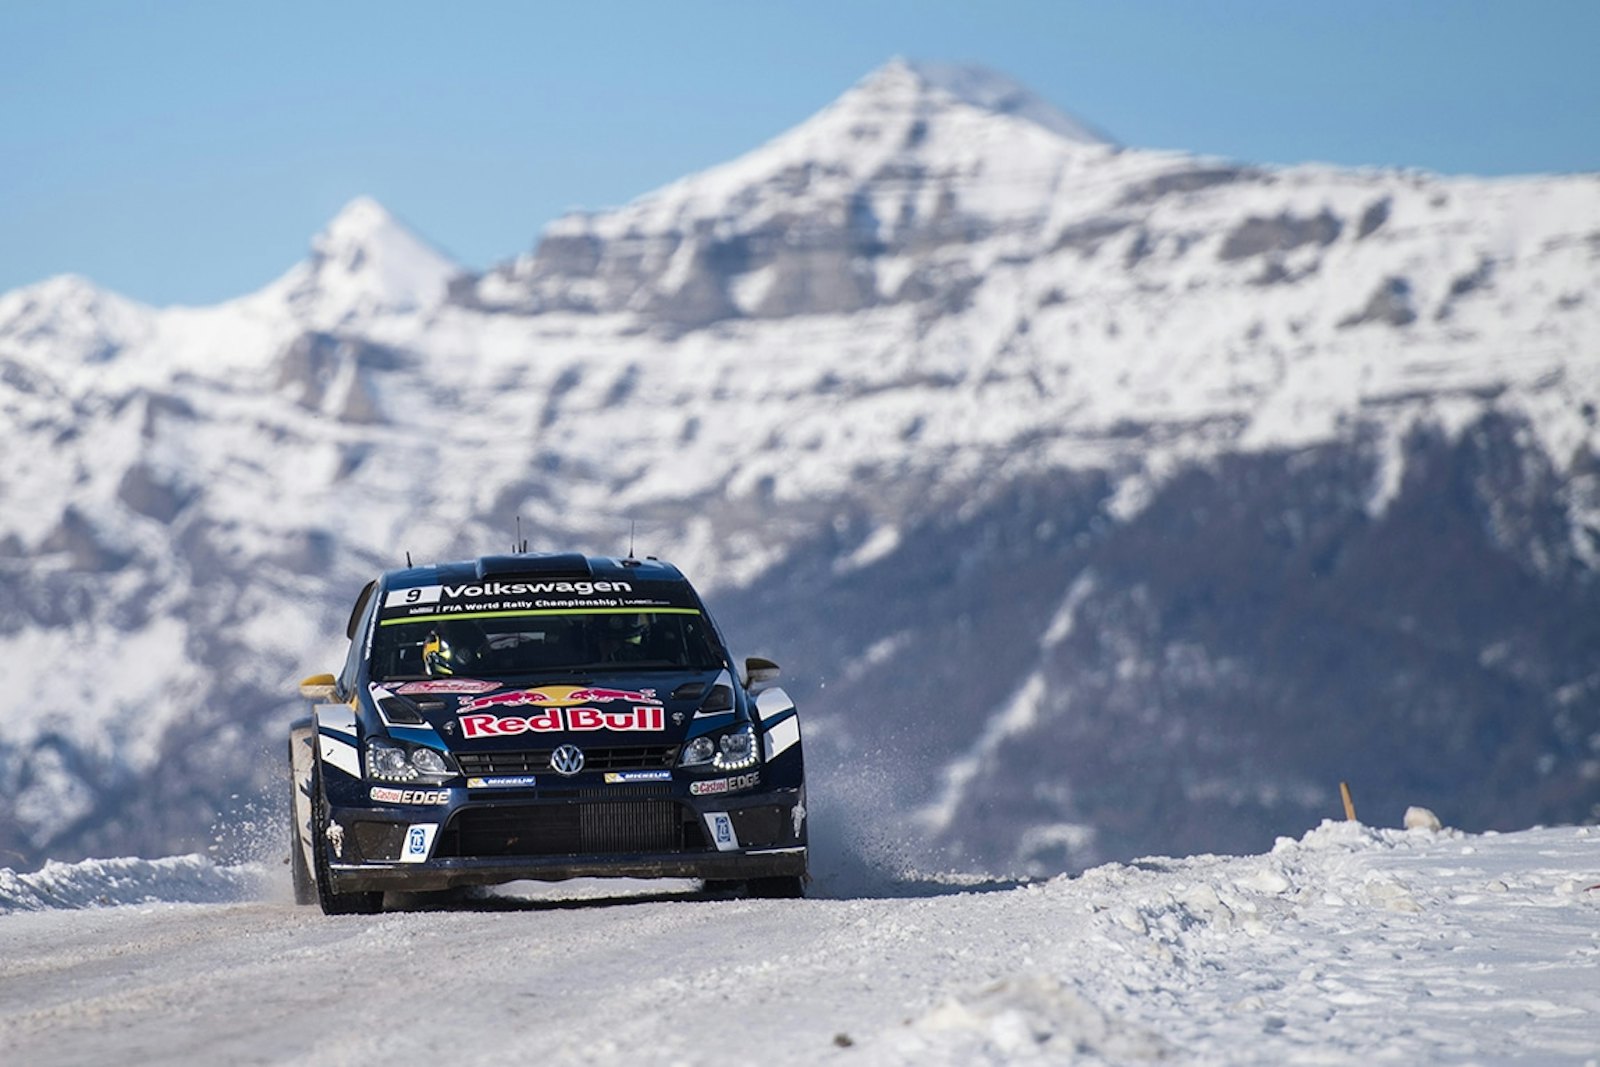 Andreas Mikkelsen (NOR) competes during the FIA World Rally Championship 2016 in Monte Carlo, Monaco on January 23, 2016 // Jaanus Ree/Red Bull Content Pool // P-20160124-00010 // Usage for editorial use only // Please go to www.redbullcontentpool.com for further information. //